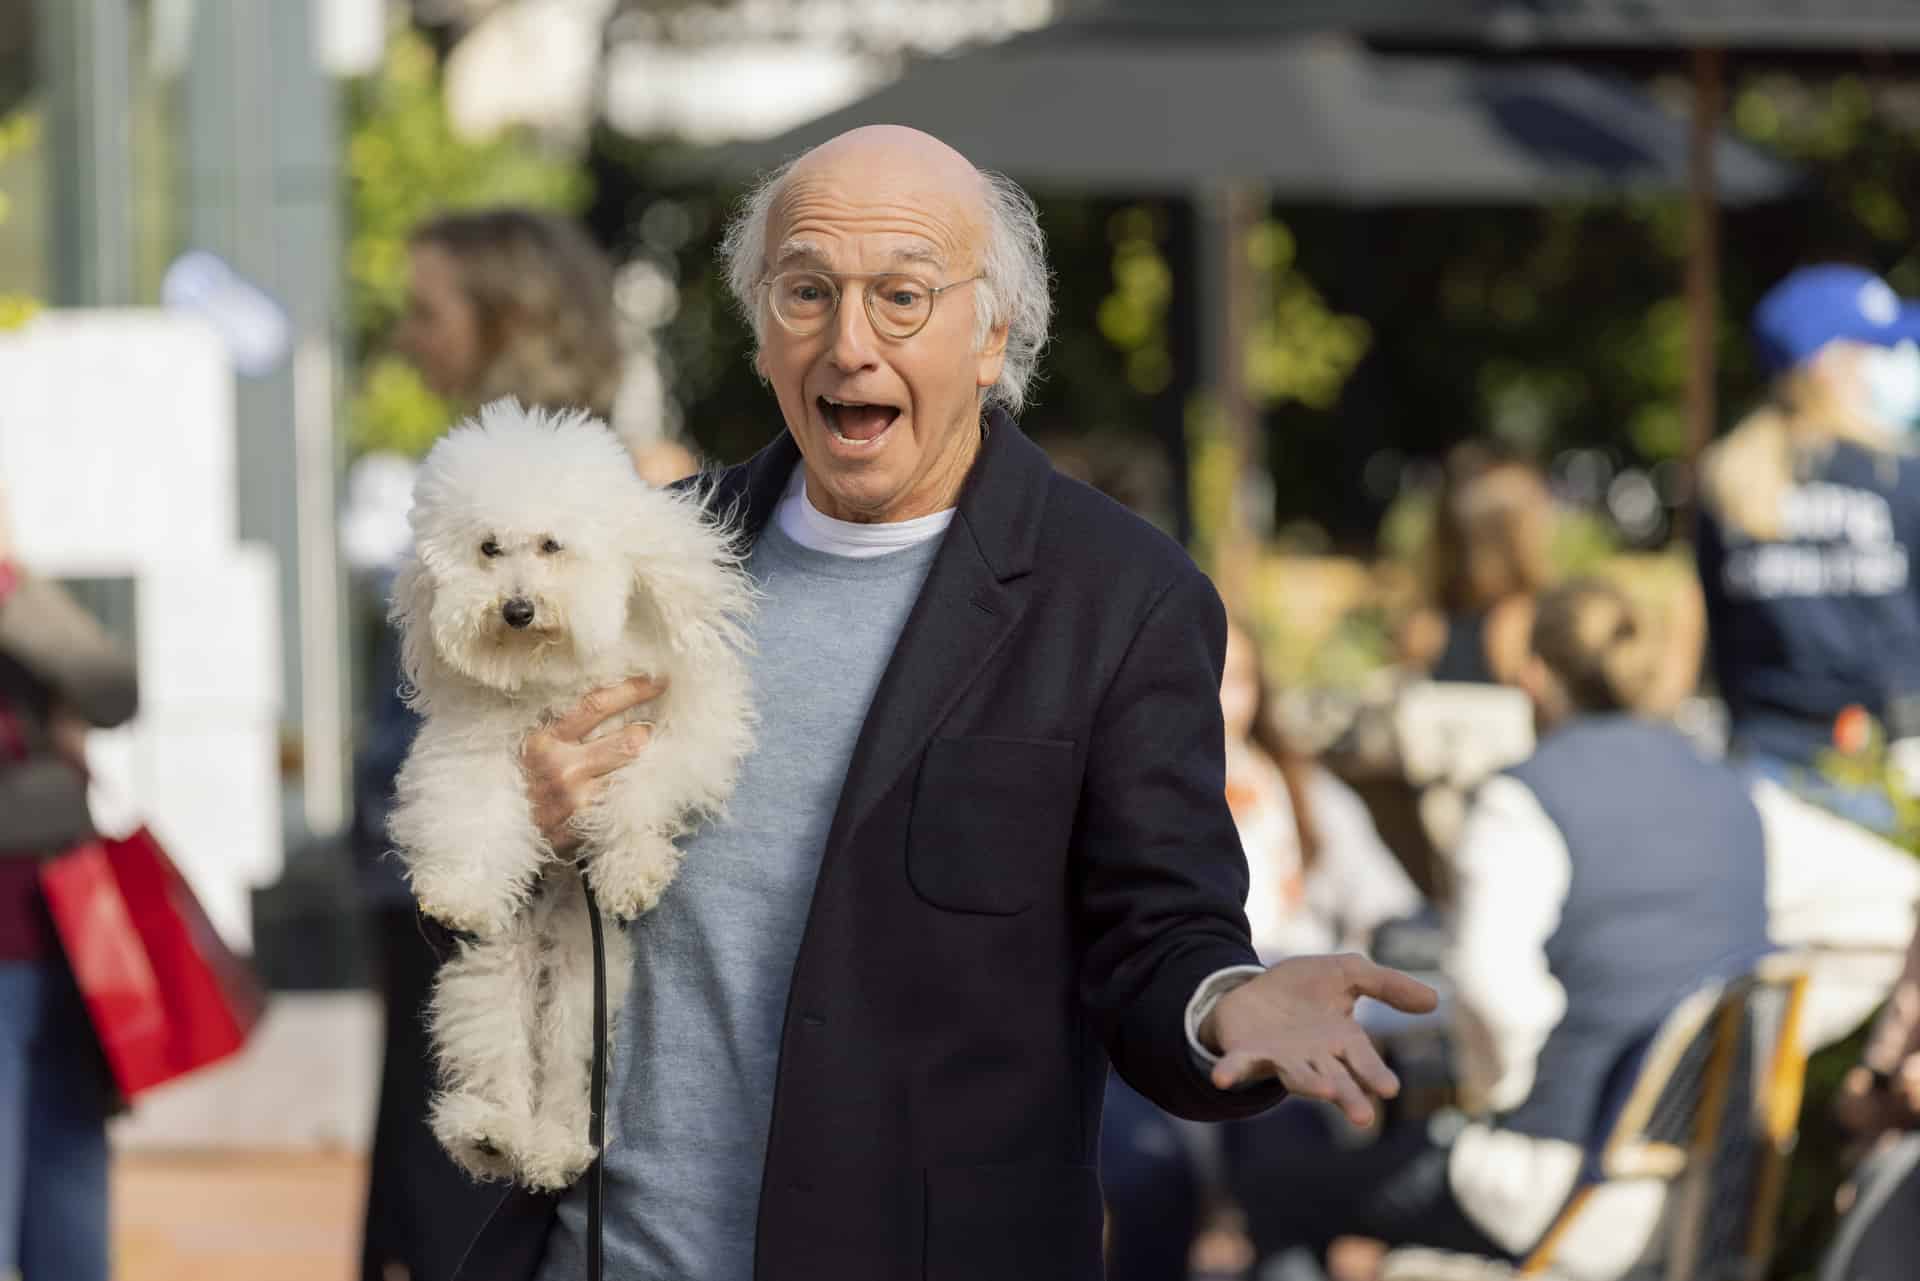 Larry David holds a white dog in this image from HBO Entertainment